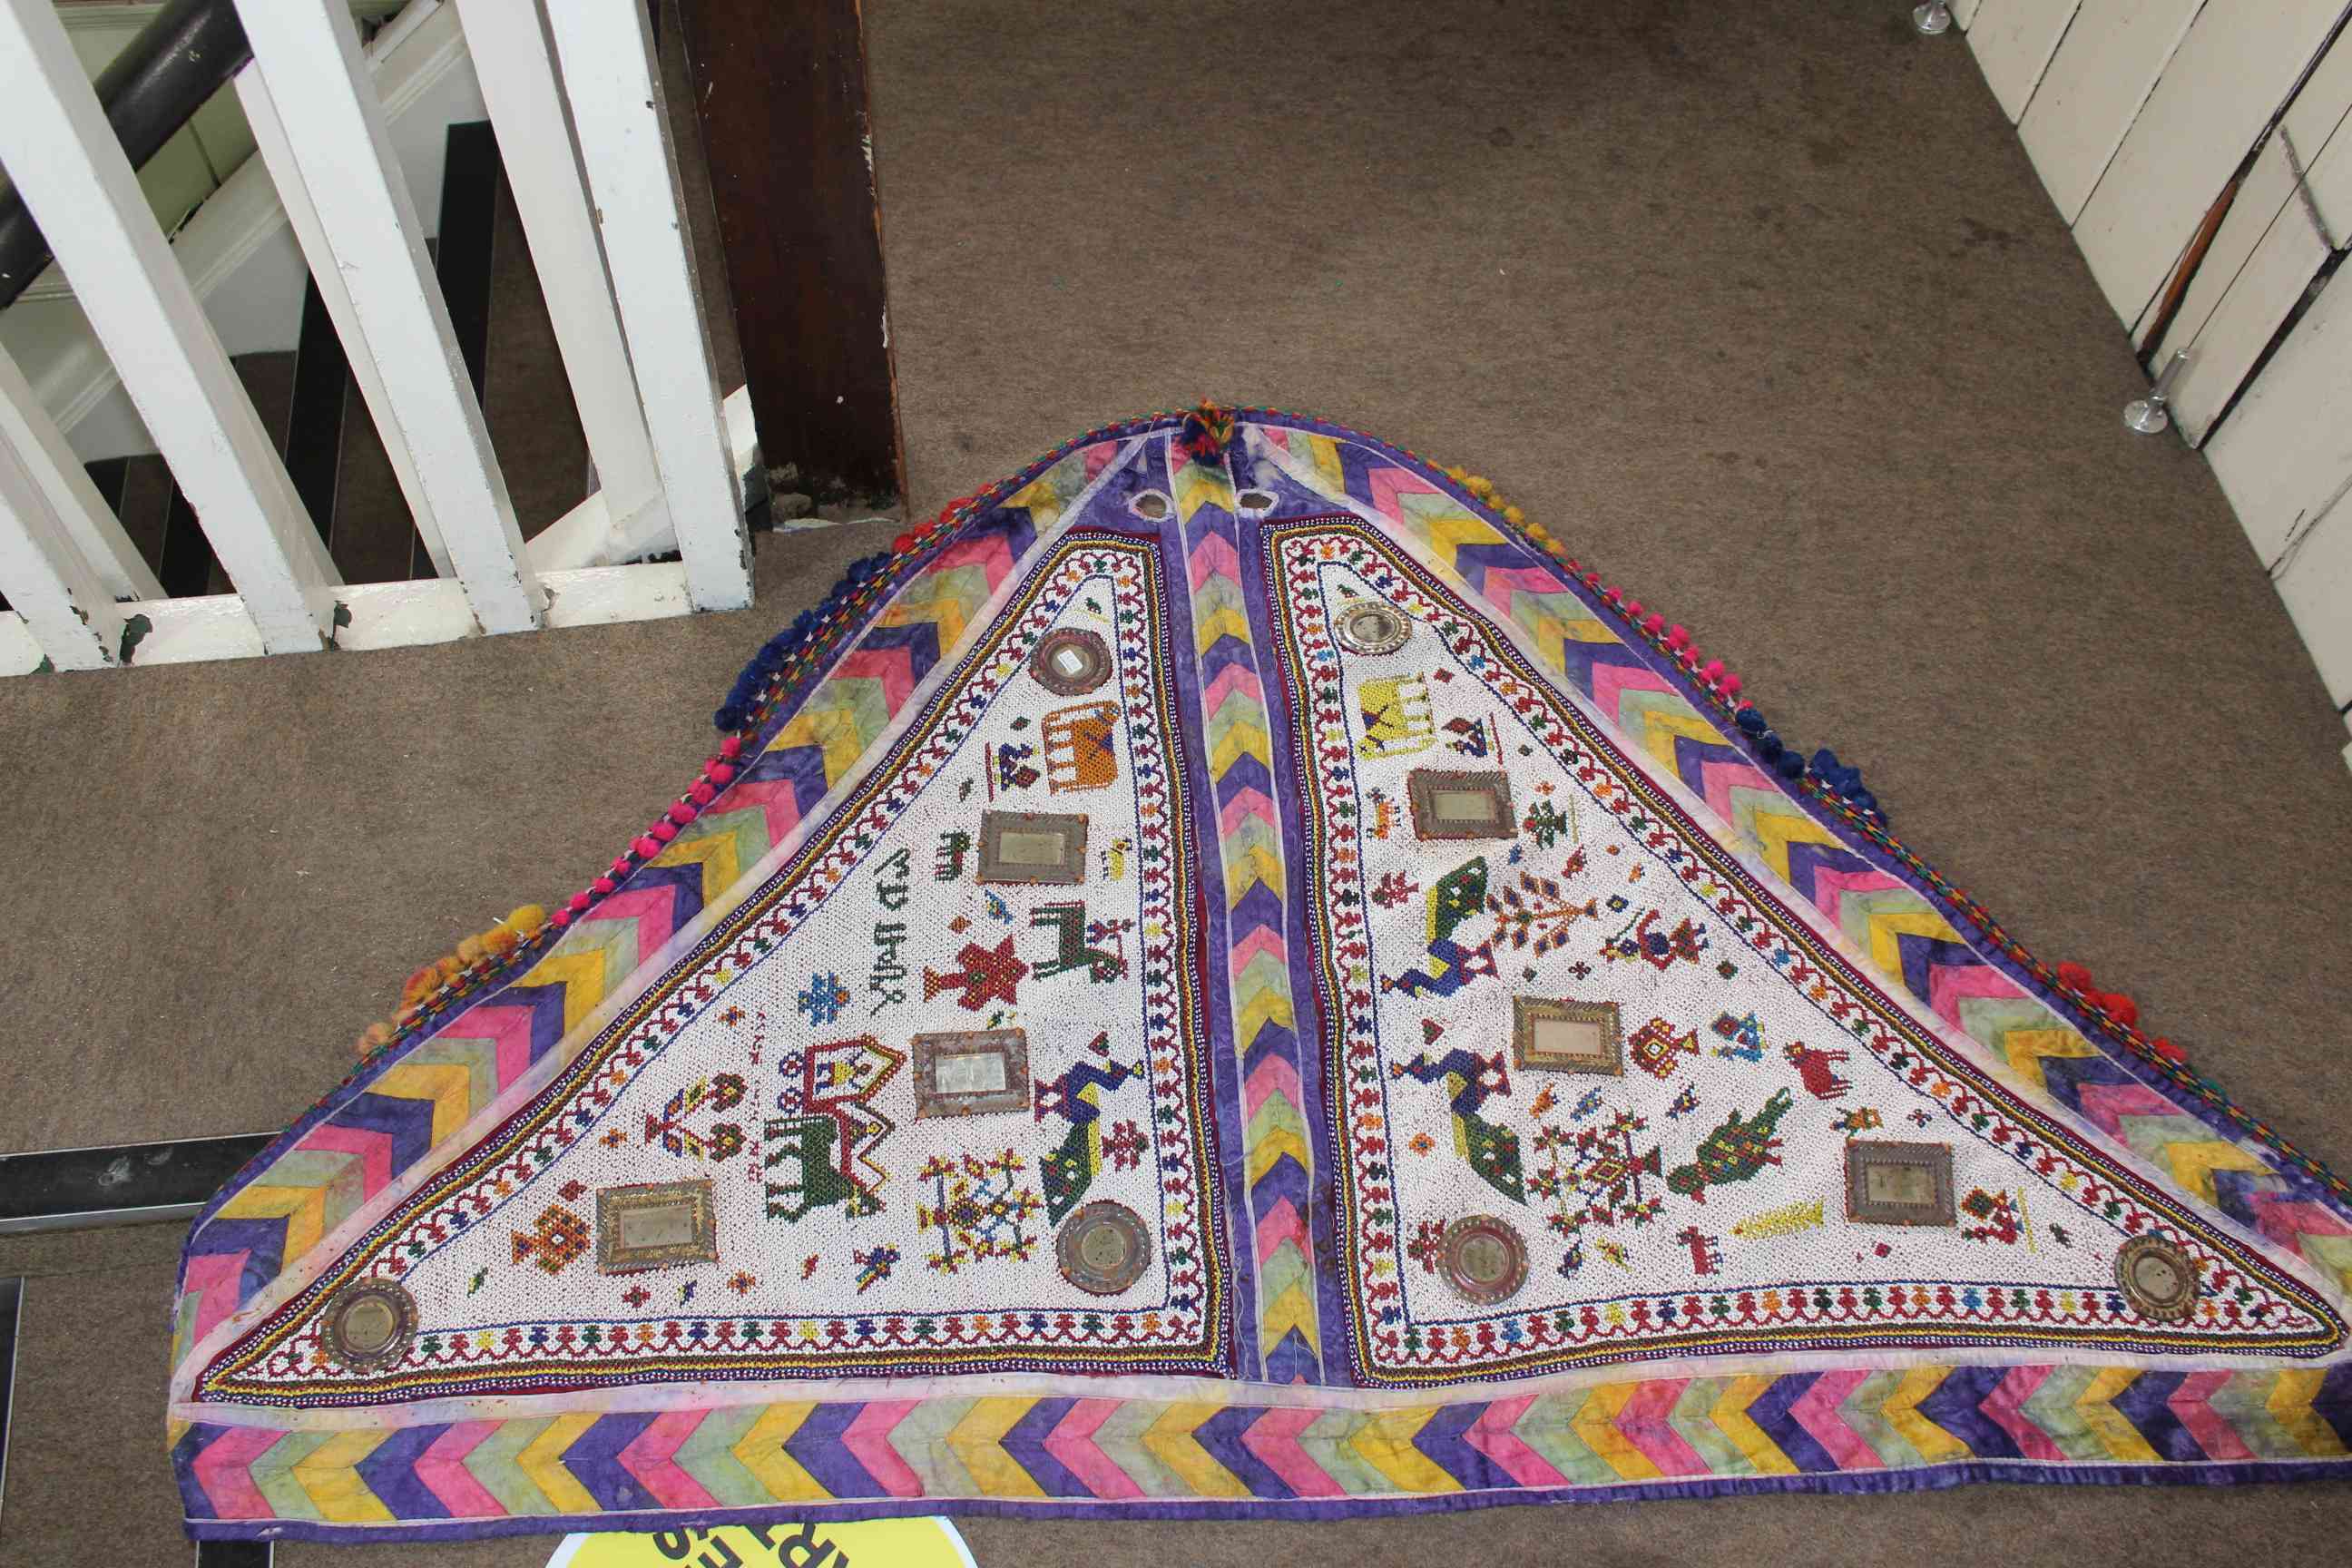 Eastern beadwork saddle cover 1.75 by 0.93.